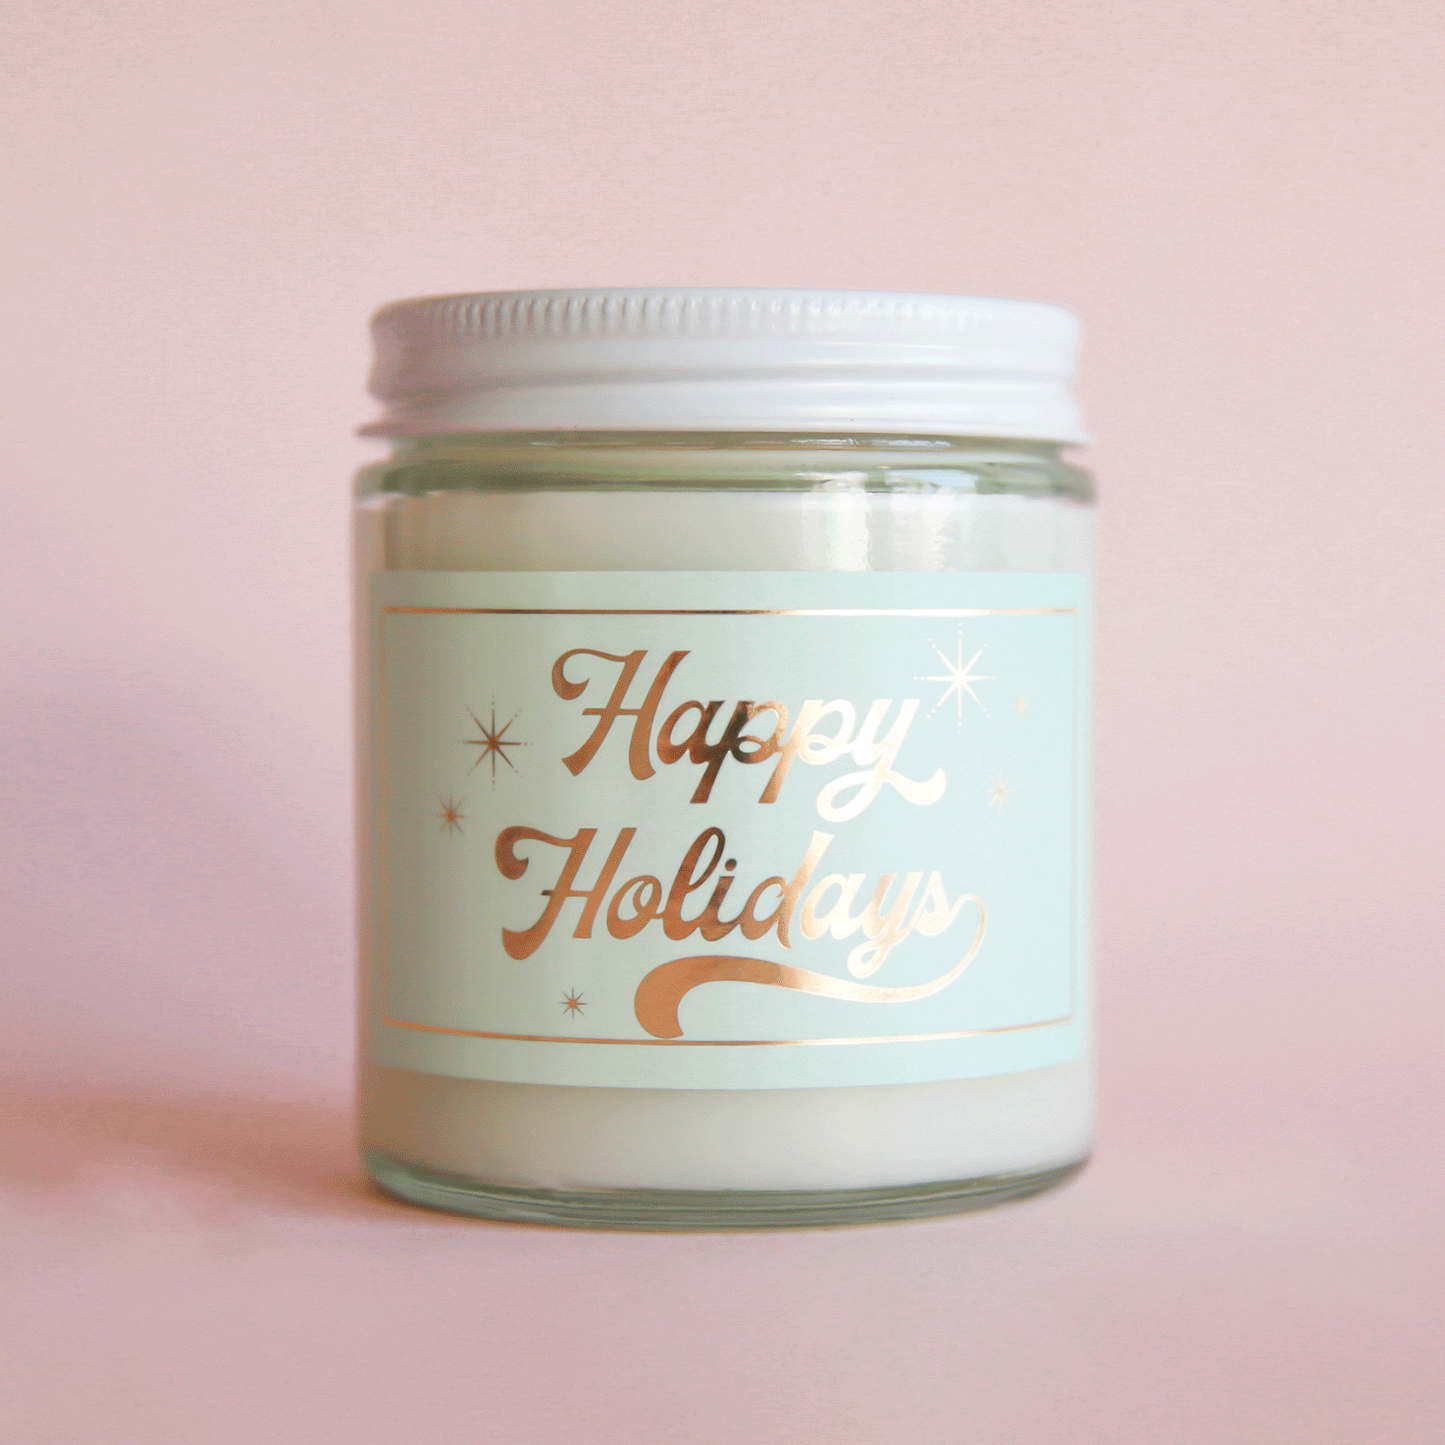 On a pink background is a clear glass candle with a light mint green label and gold text that reads, "Happy Holidays".